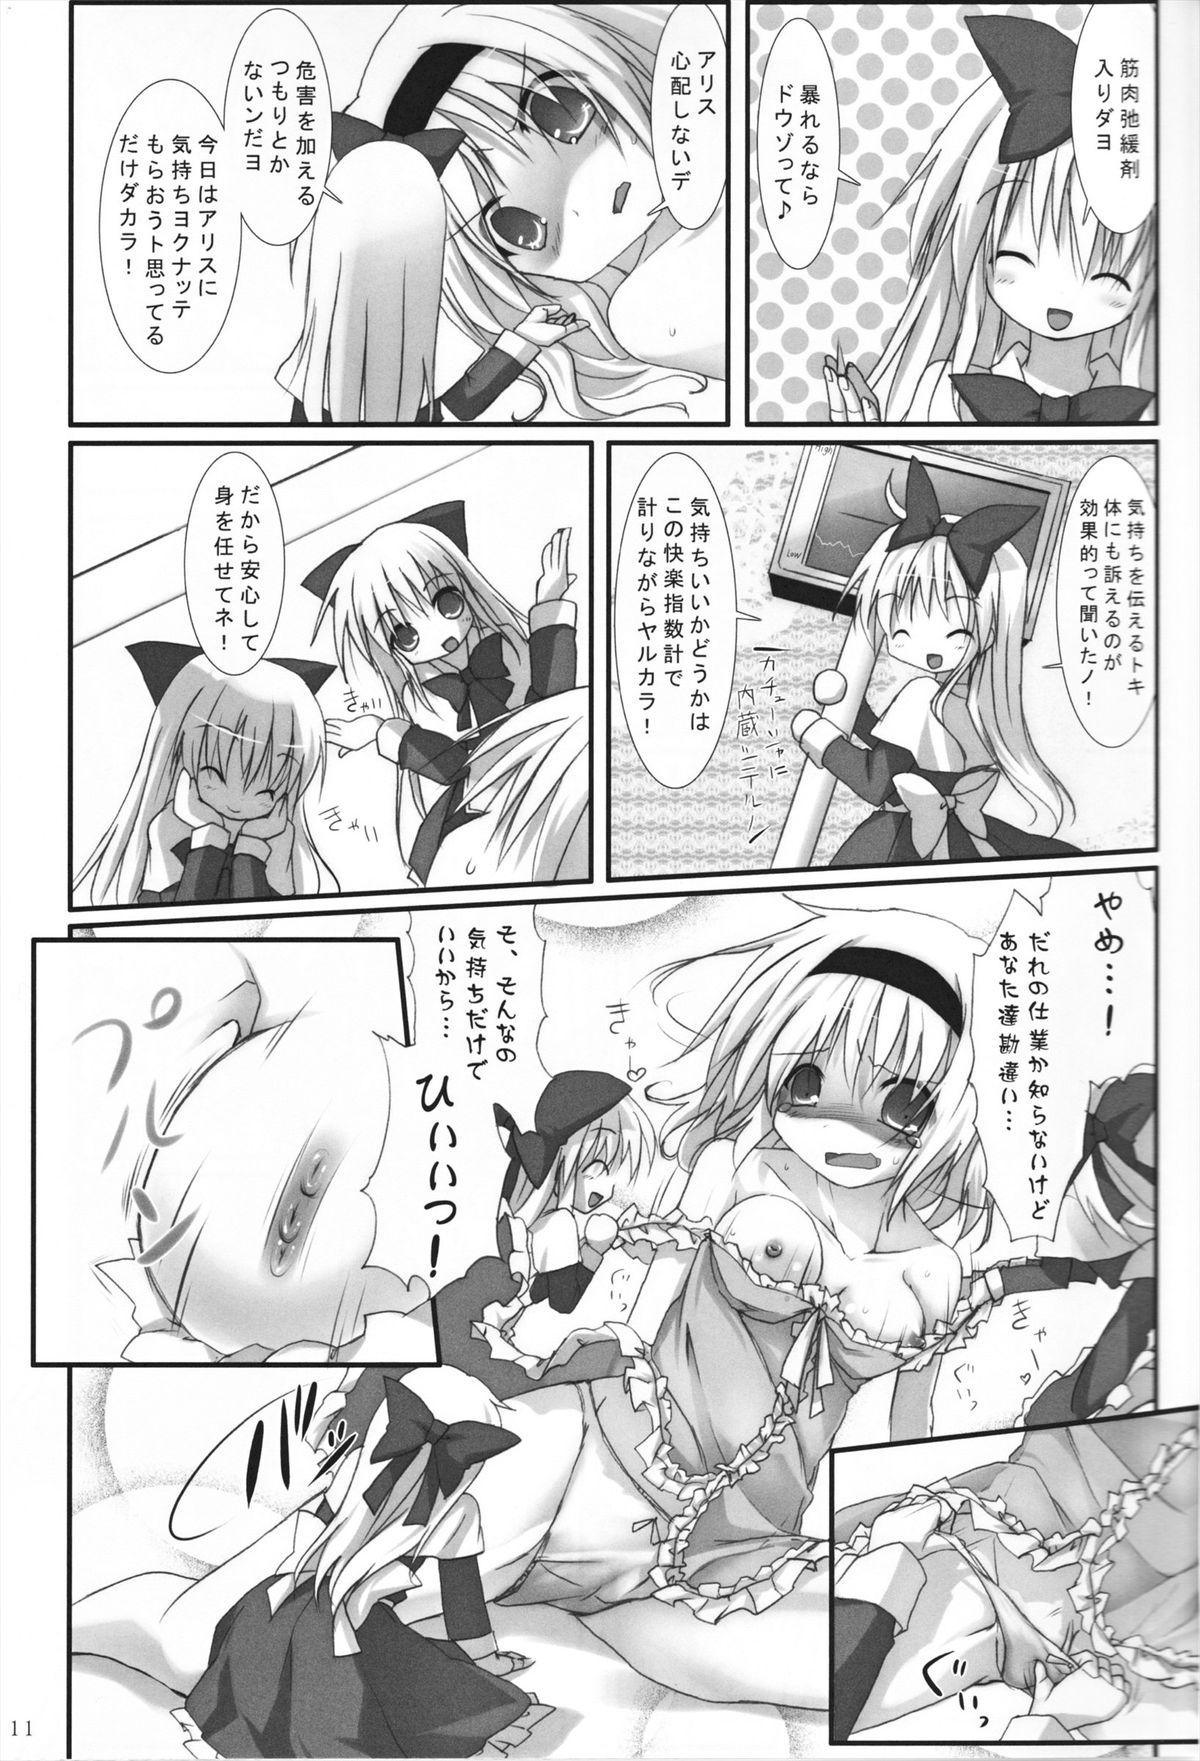 Ddf Porn Alice in Nightmare - Touhou project Bang Bros - Page 11